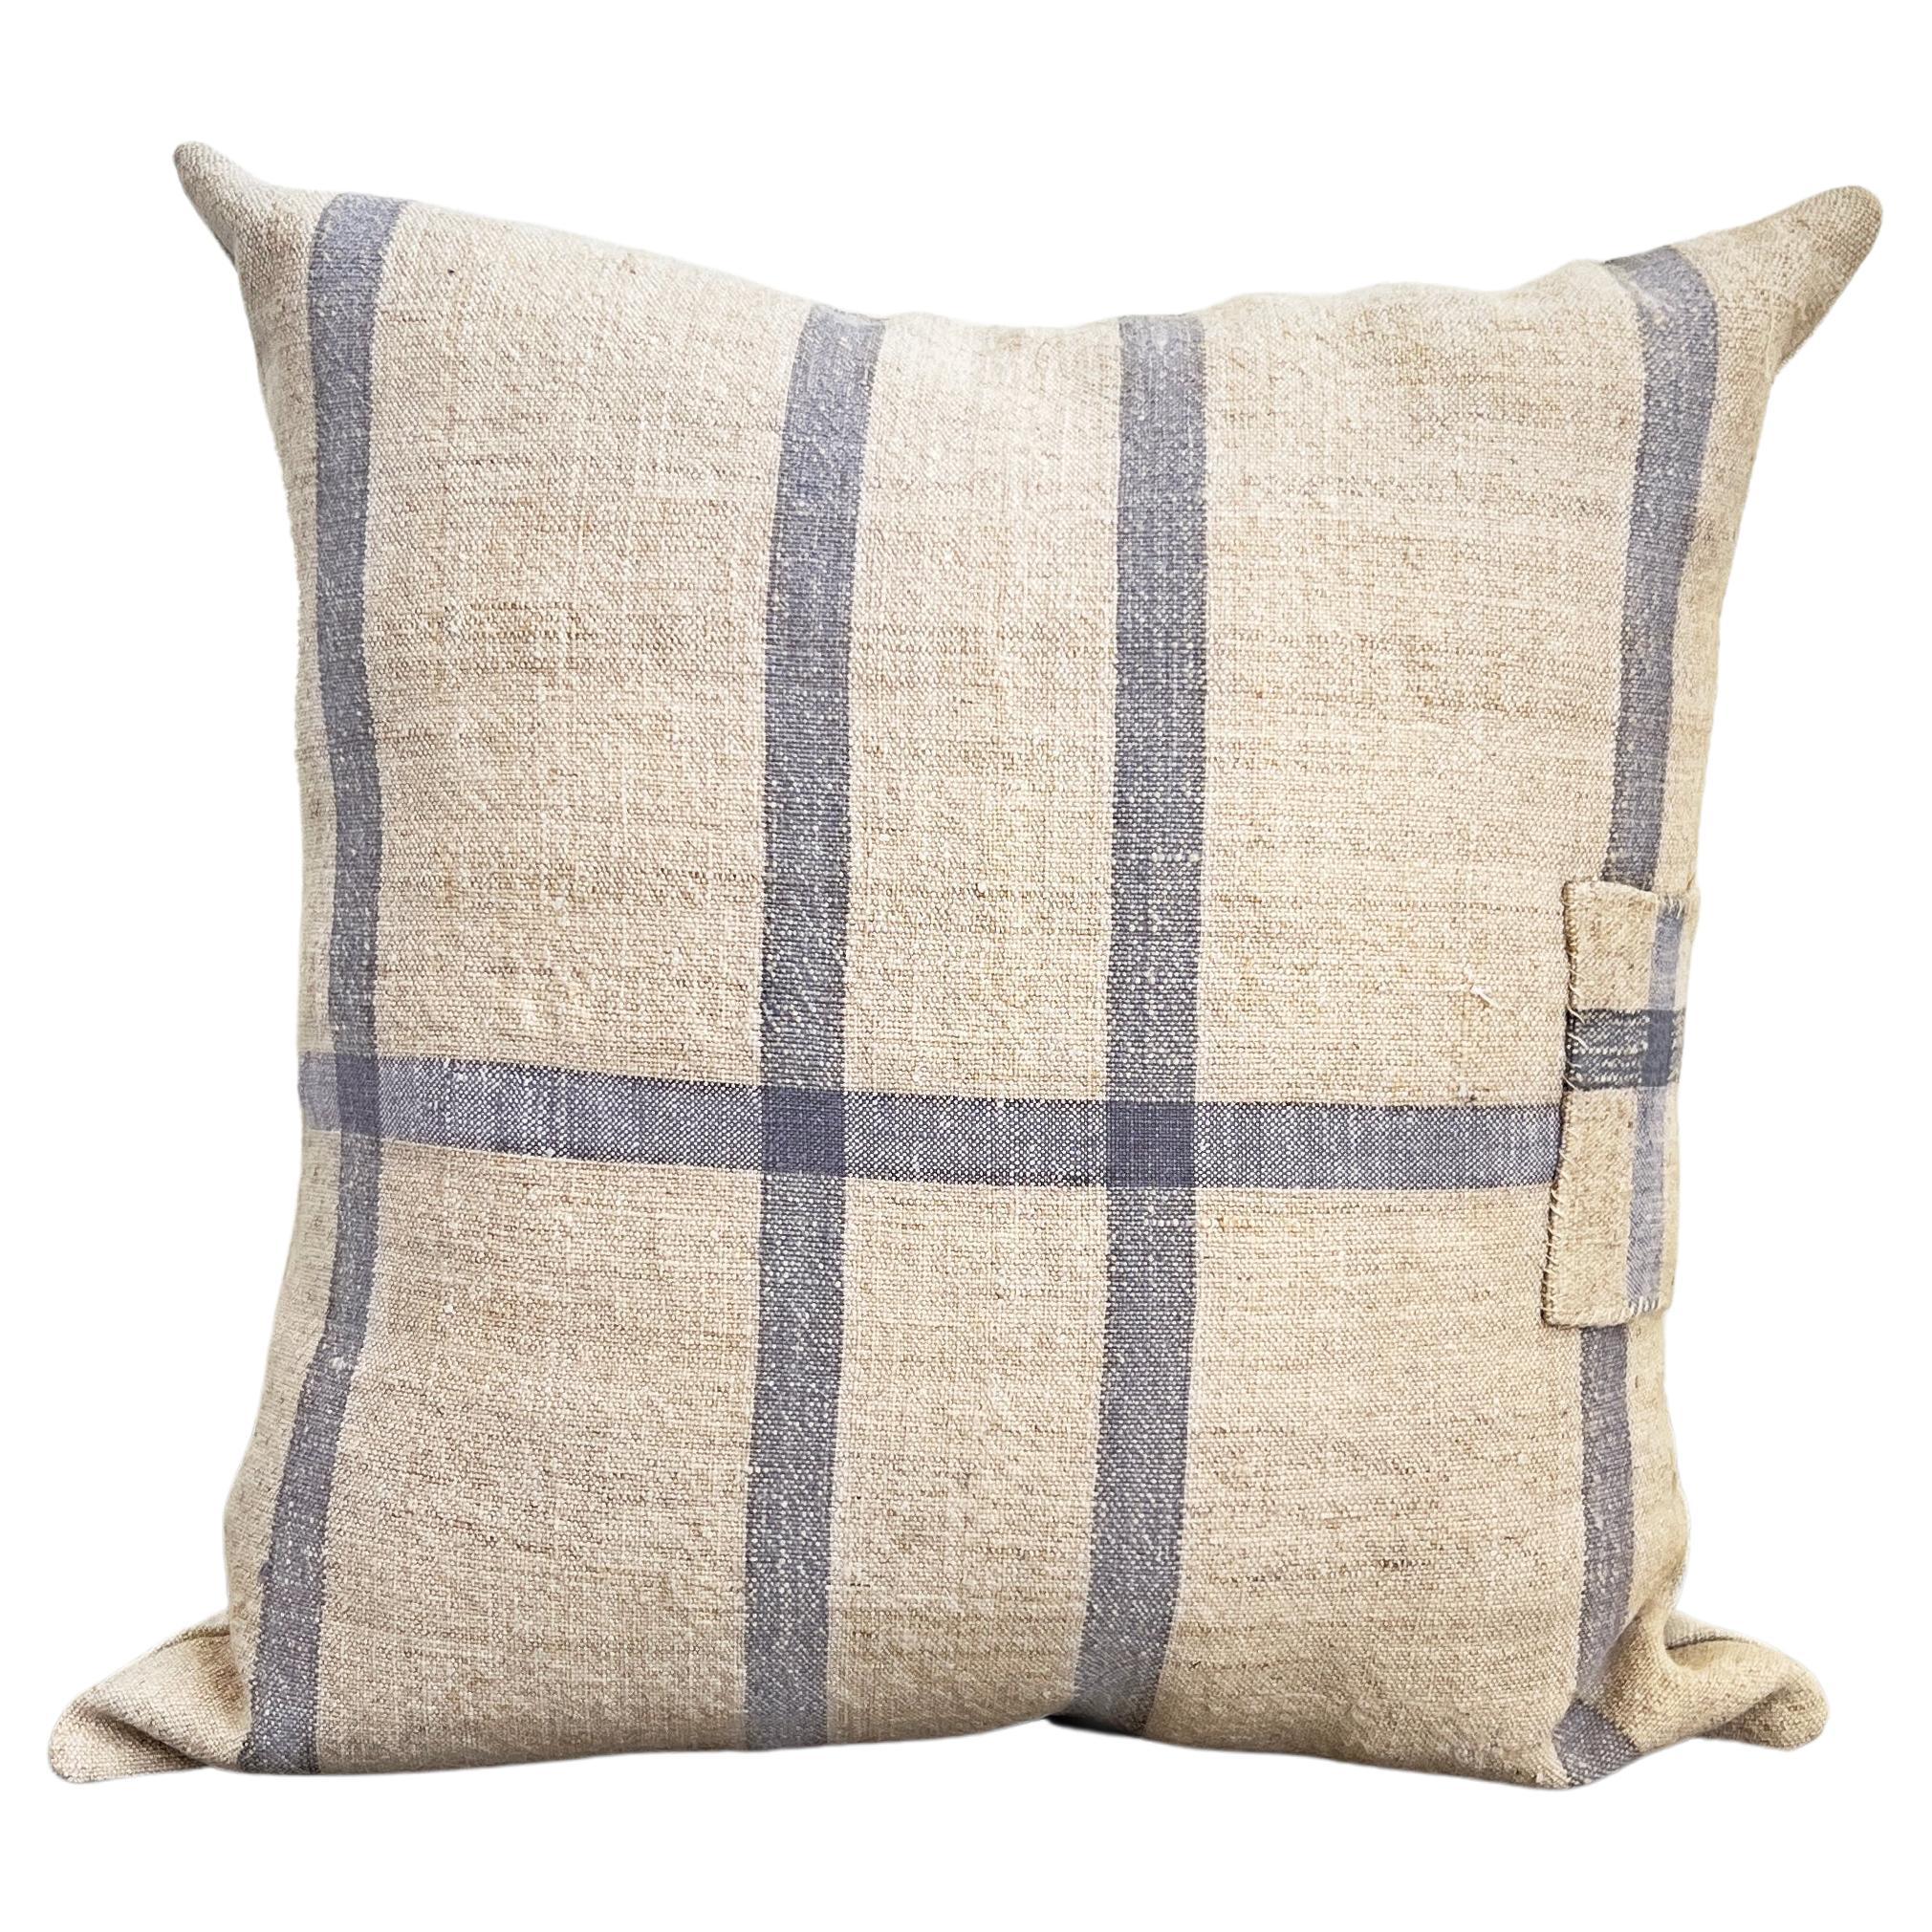 Matilde Blue Checkered Square Throw Pillow made from Vintage Linen For Sale